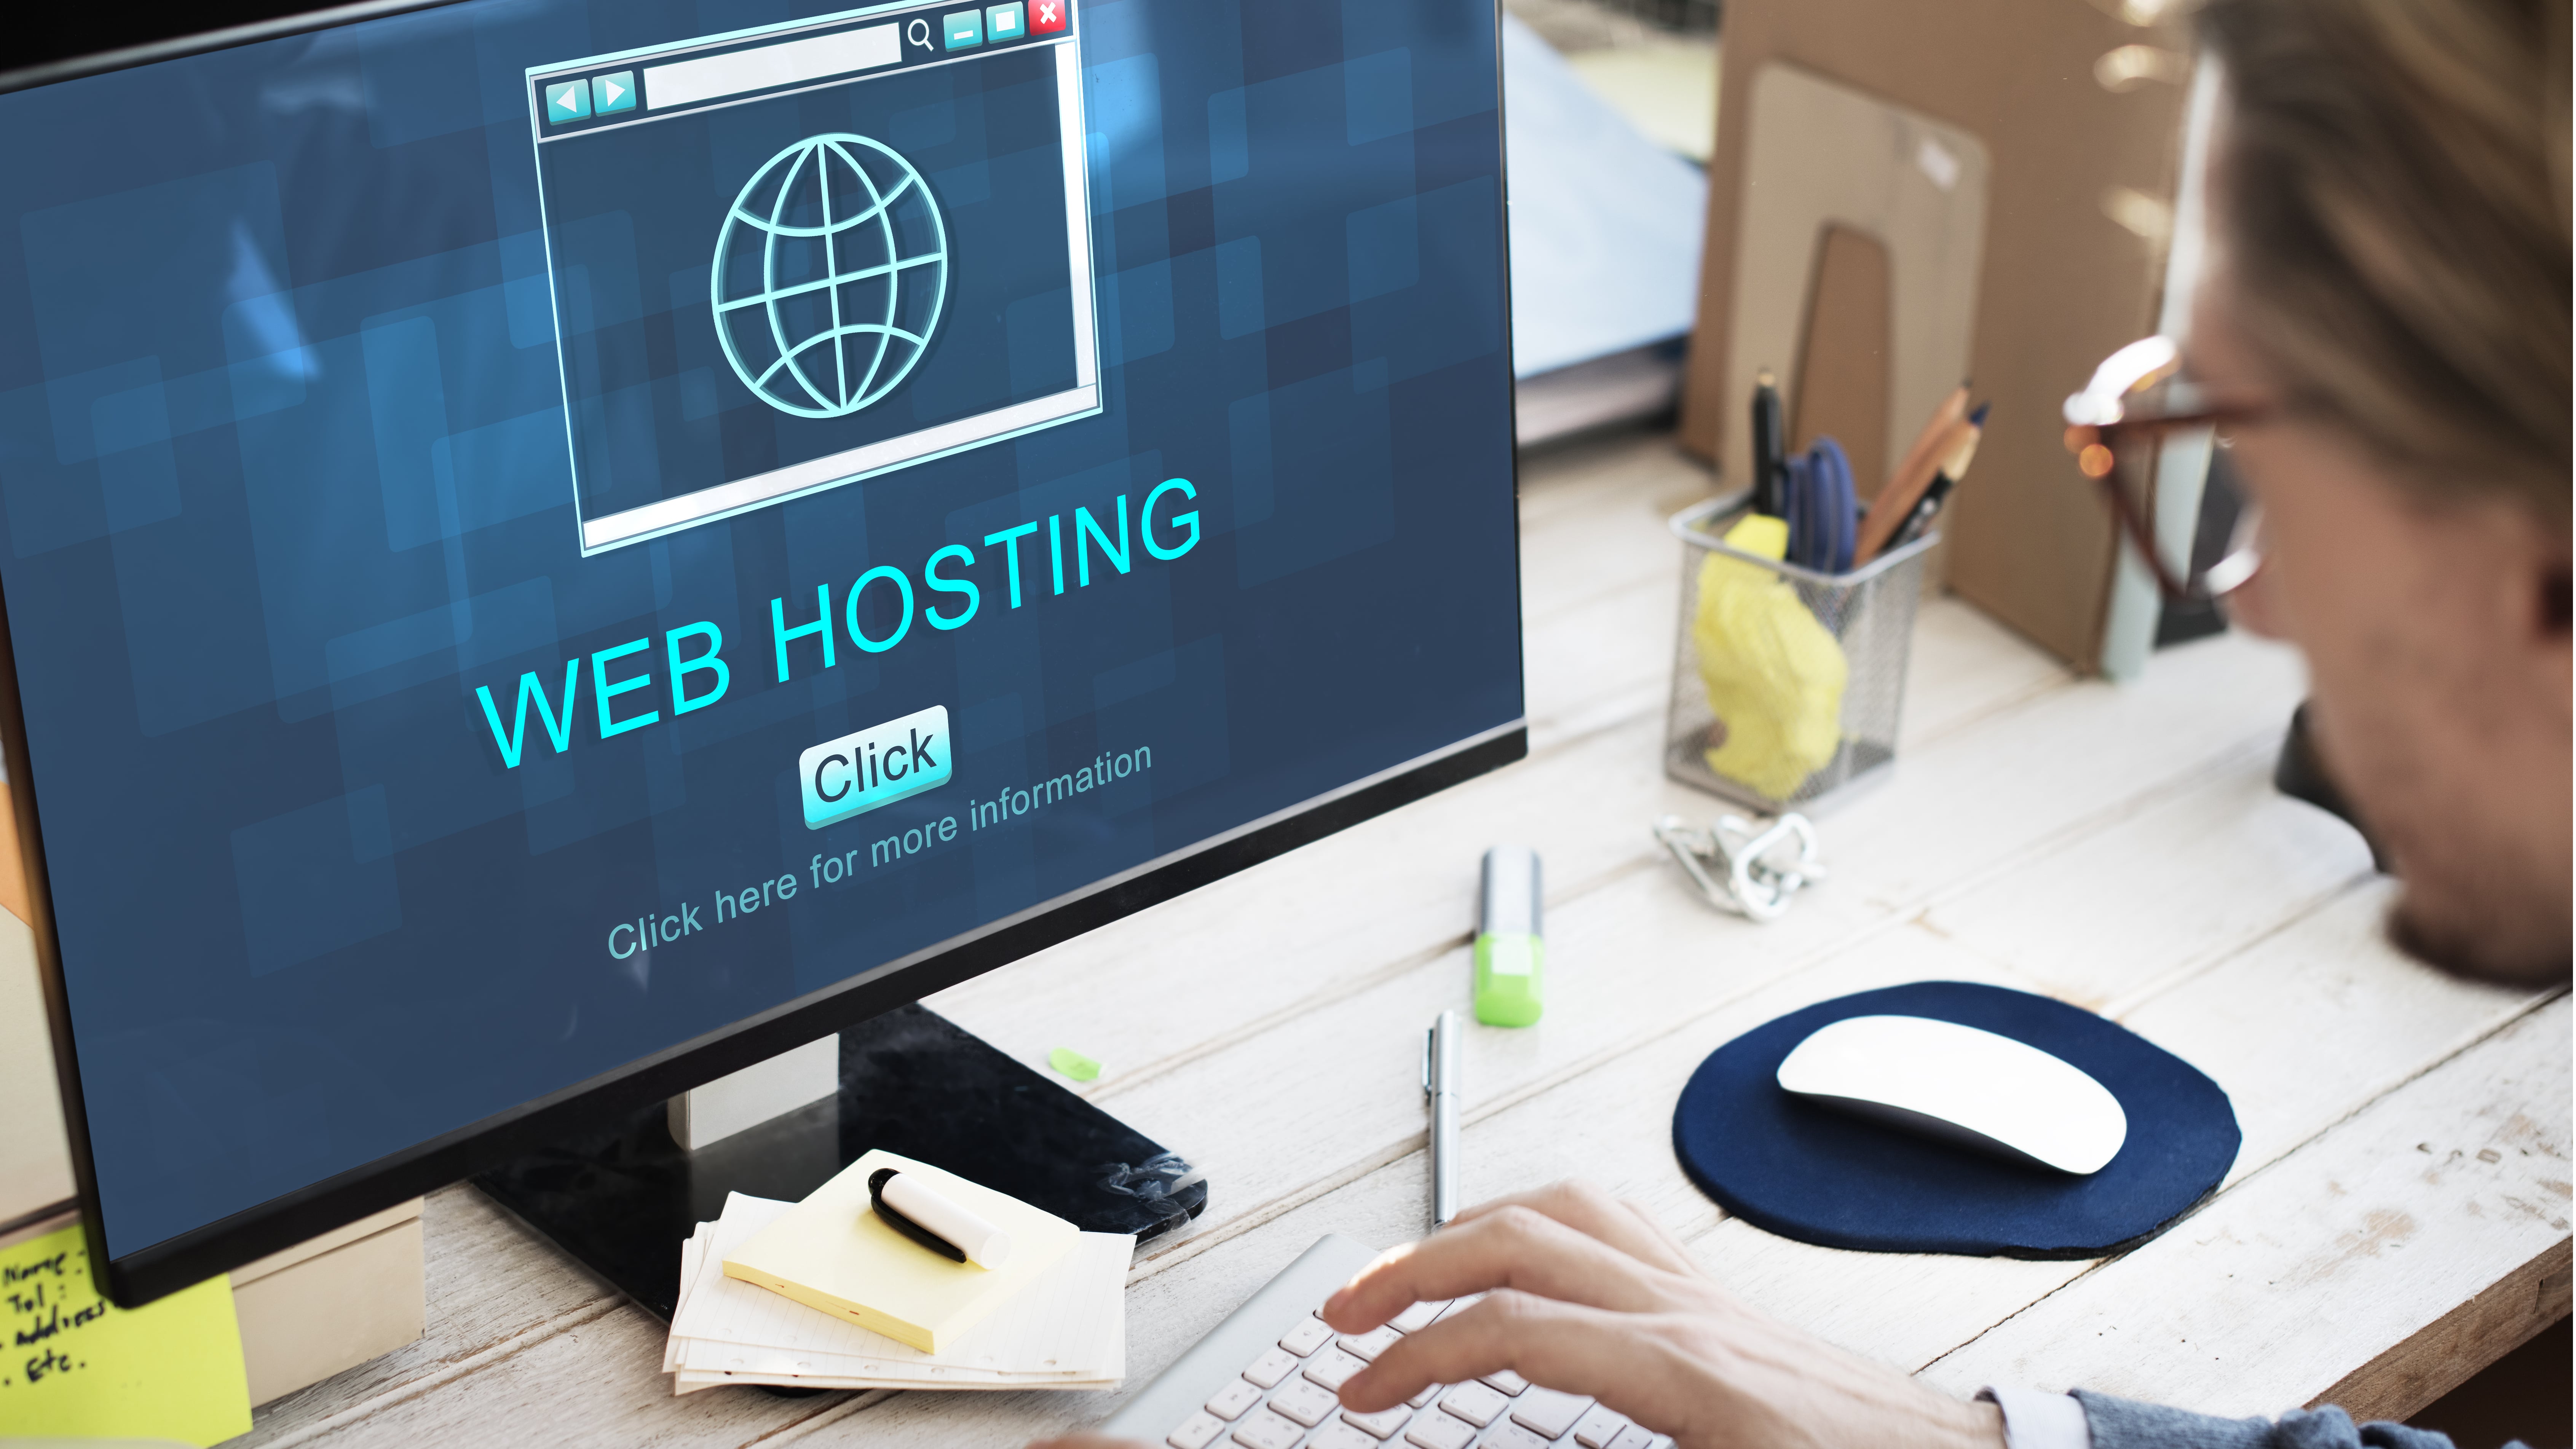 Search for free website hosting surges as economic downturn bites